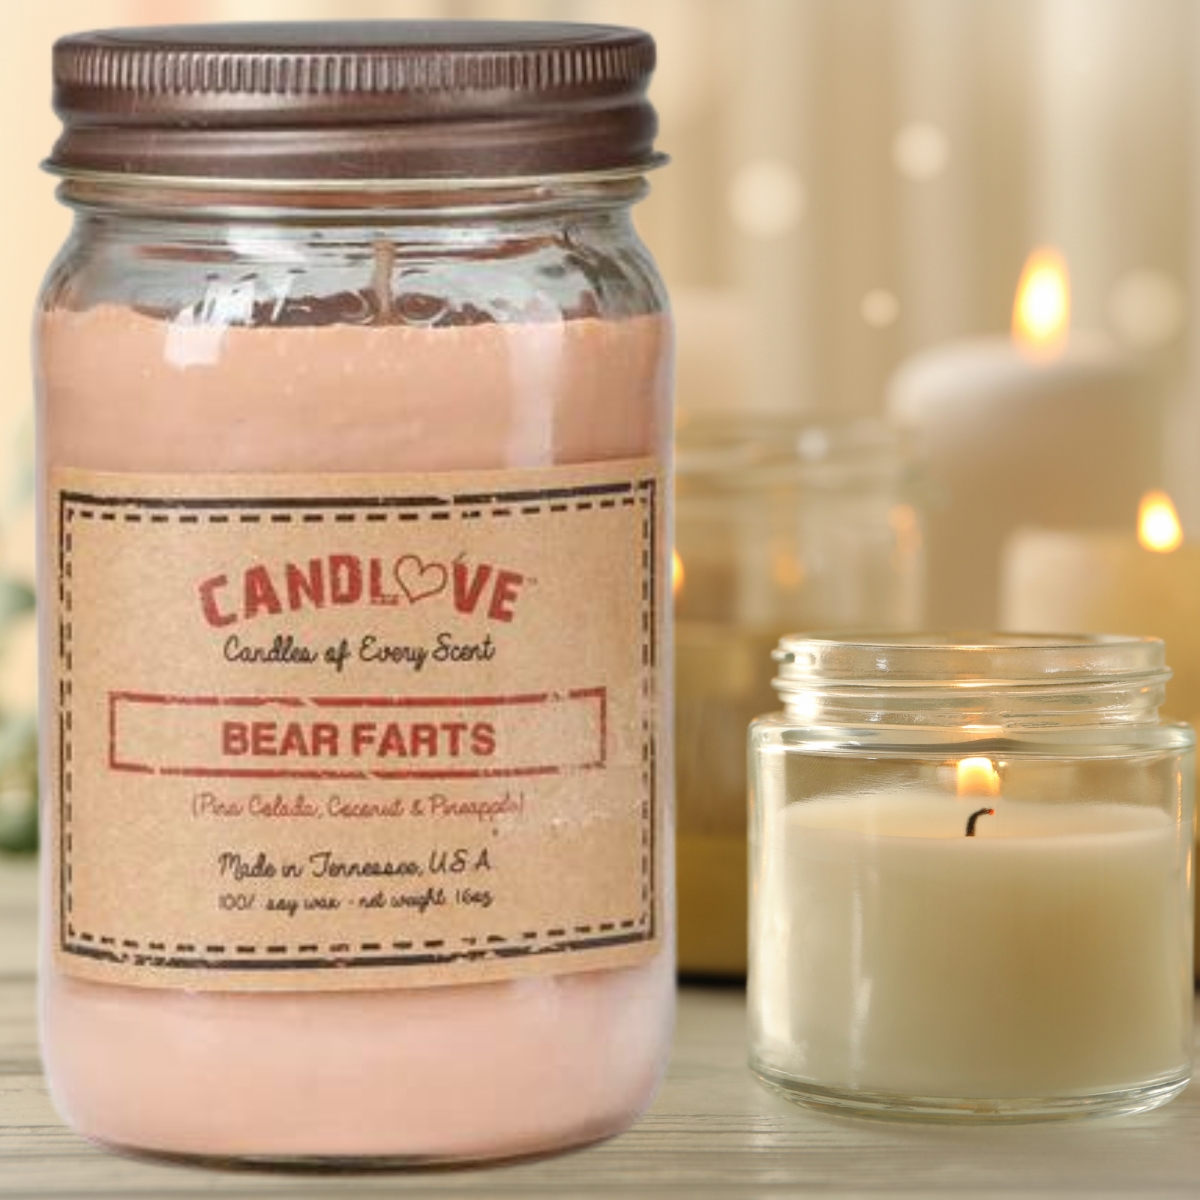 Picture of PPI SUPPLIES Bea-F-C Candlove Bear Farts Scented Candle - Non-Toxic 100% Soy Candle - Handmade & Hand Poured Long Burning Candle - Highly Scented All Natural Clean Burning Candle (16 OZ Mason Jar) Made in The USA